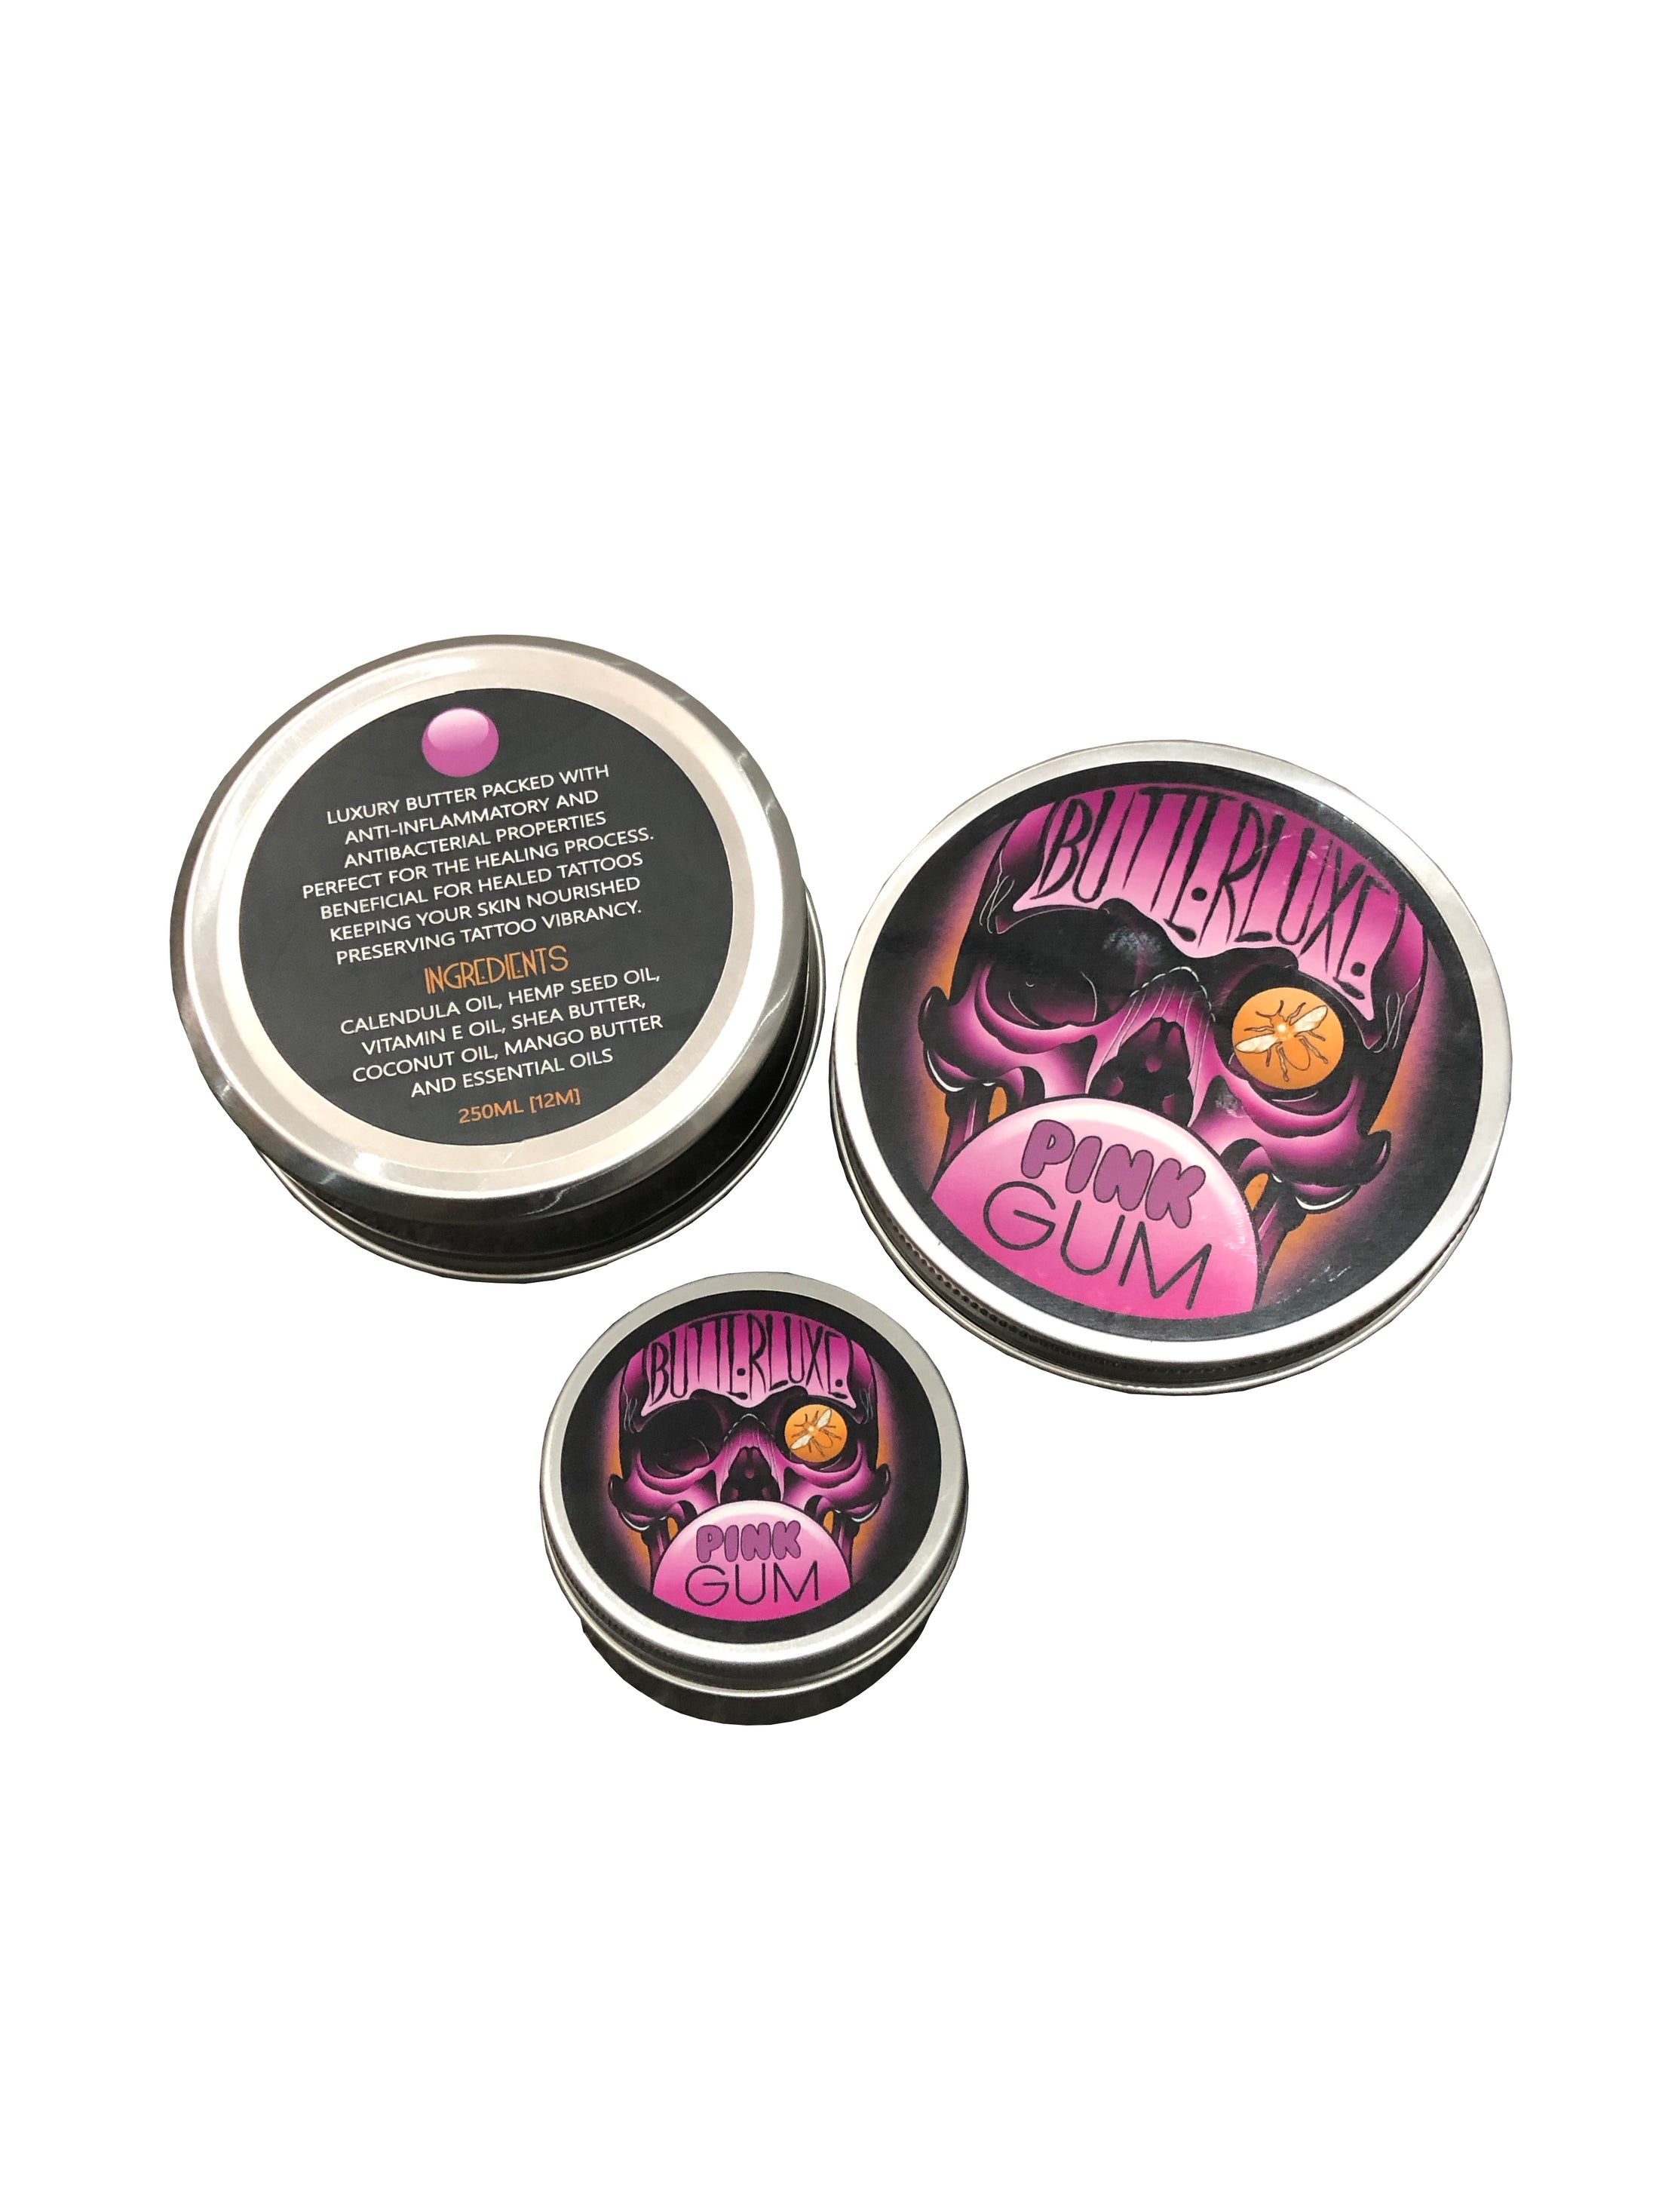 PINK GUM Whipped Butter – Butterluxe Limited